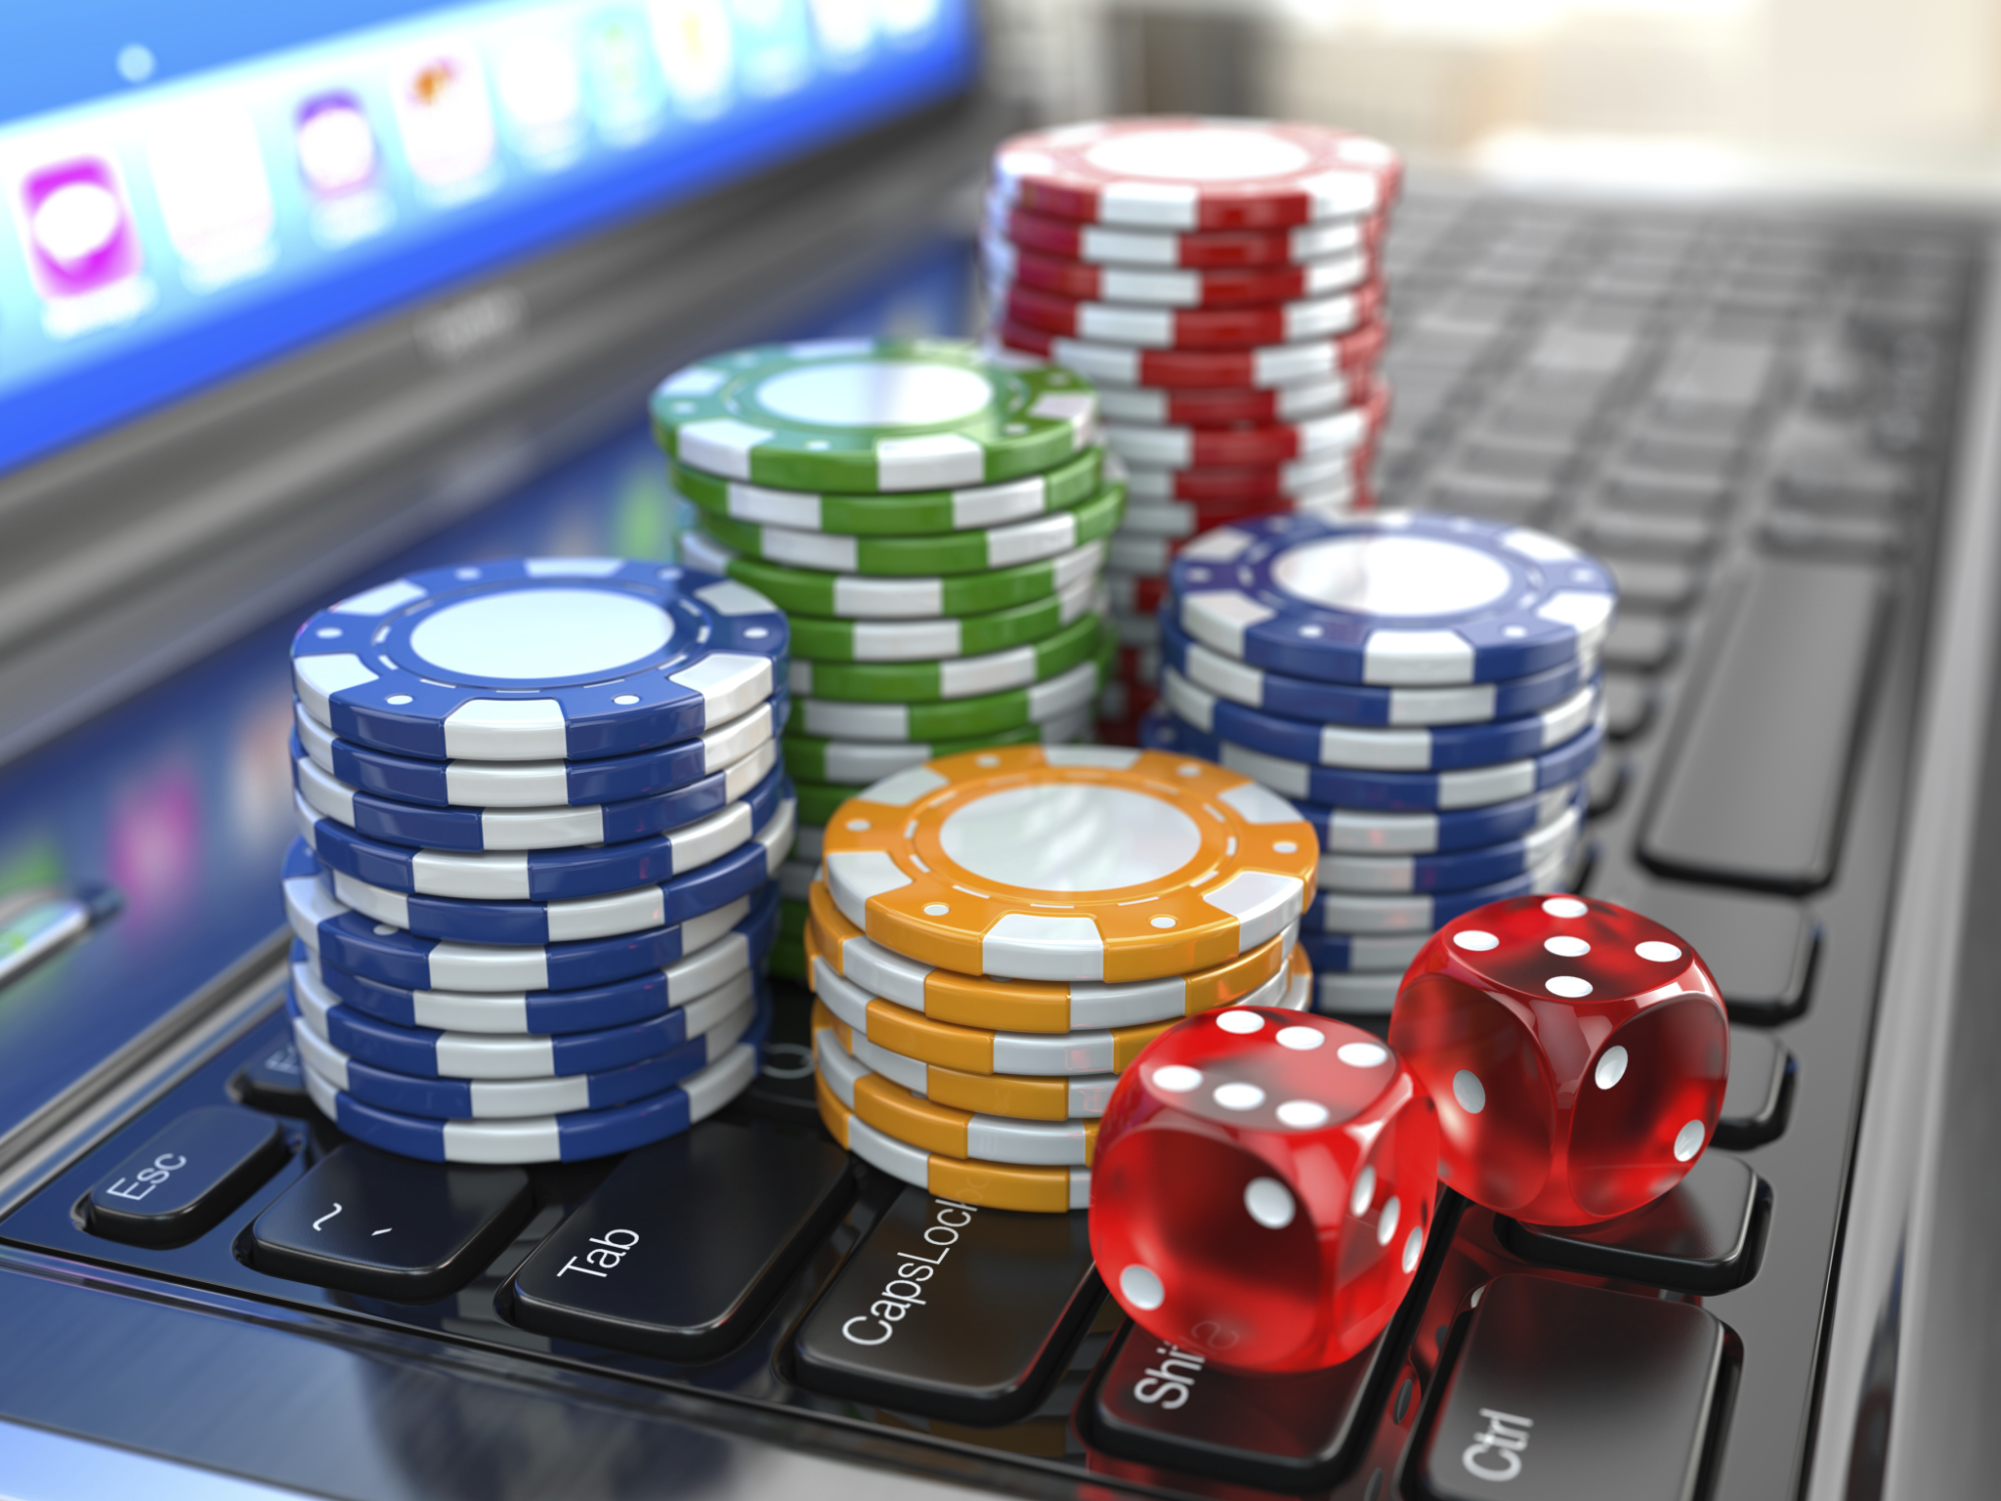 Dive Deep into Entertainment - Immerse Yourself in Online Casino Thrills